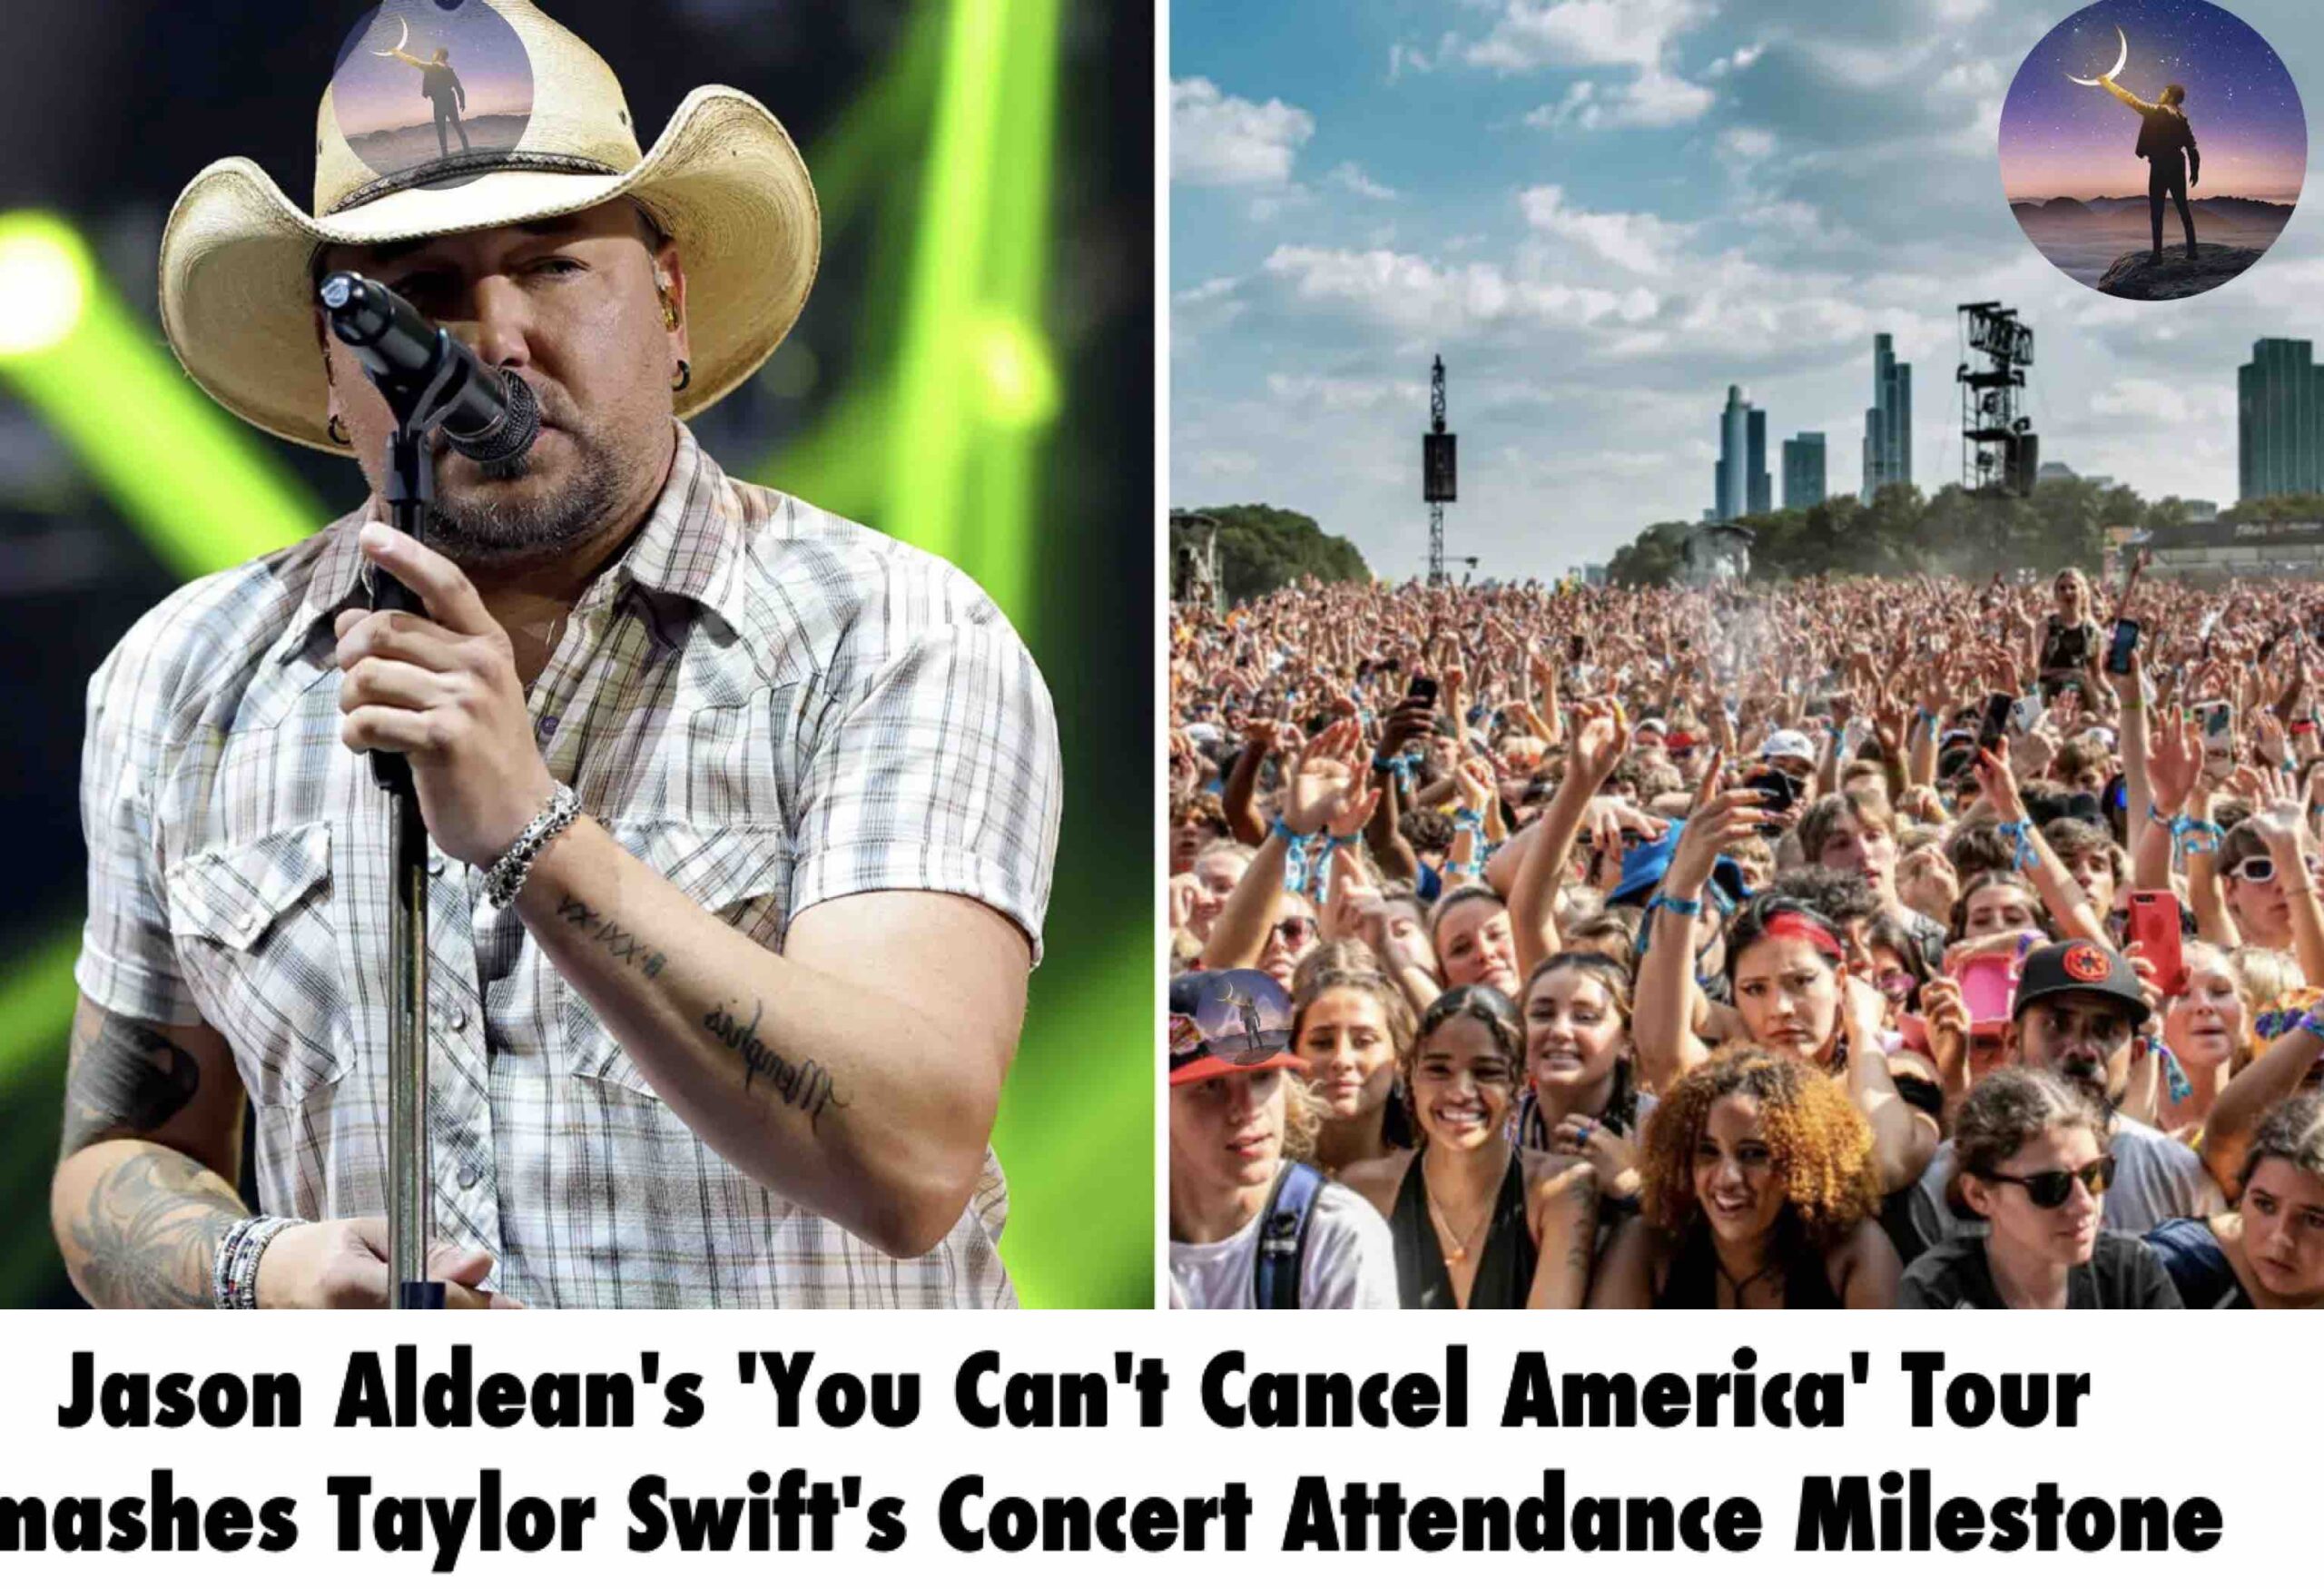 Breaking: Jason Aldean’s ‘You Can’t Cancel America’ Tour Shatters Taylor Swift’s Concert Attendance Record